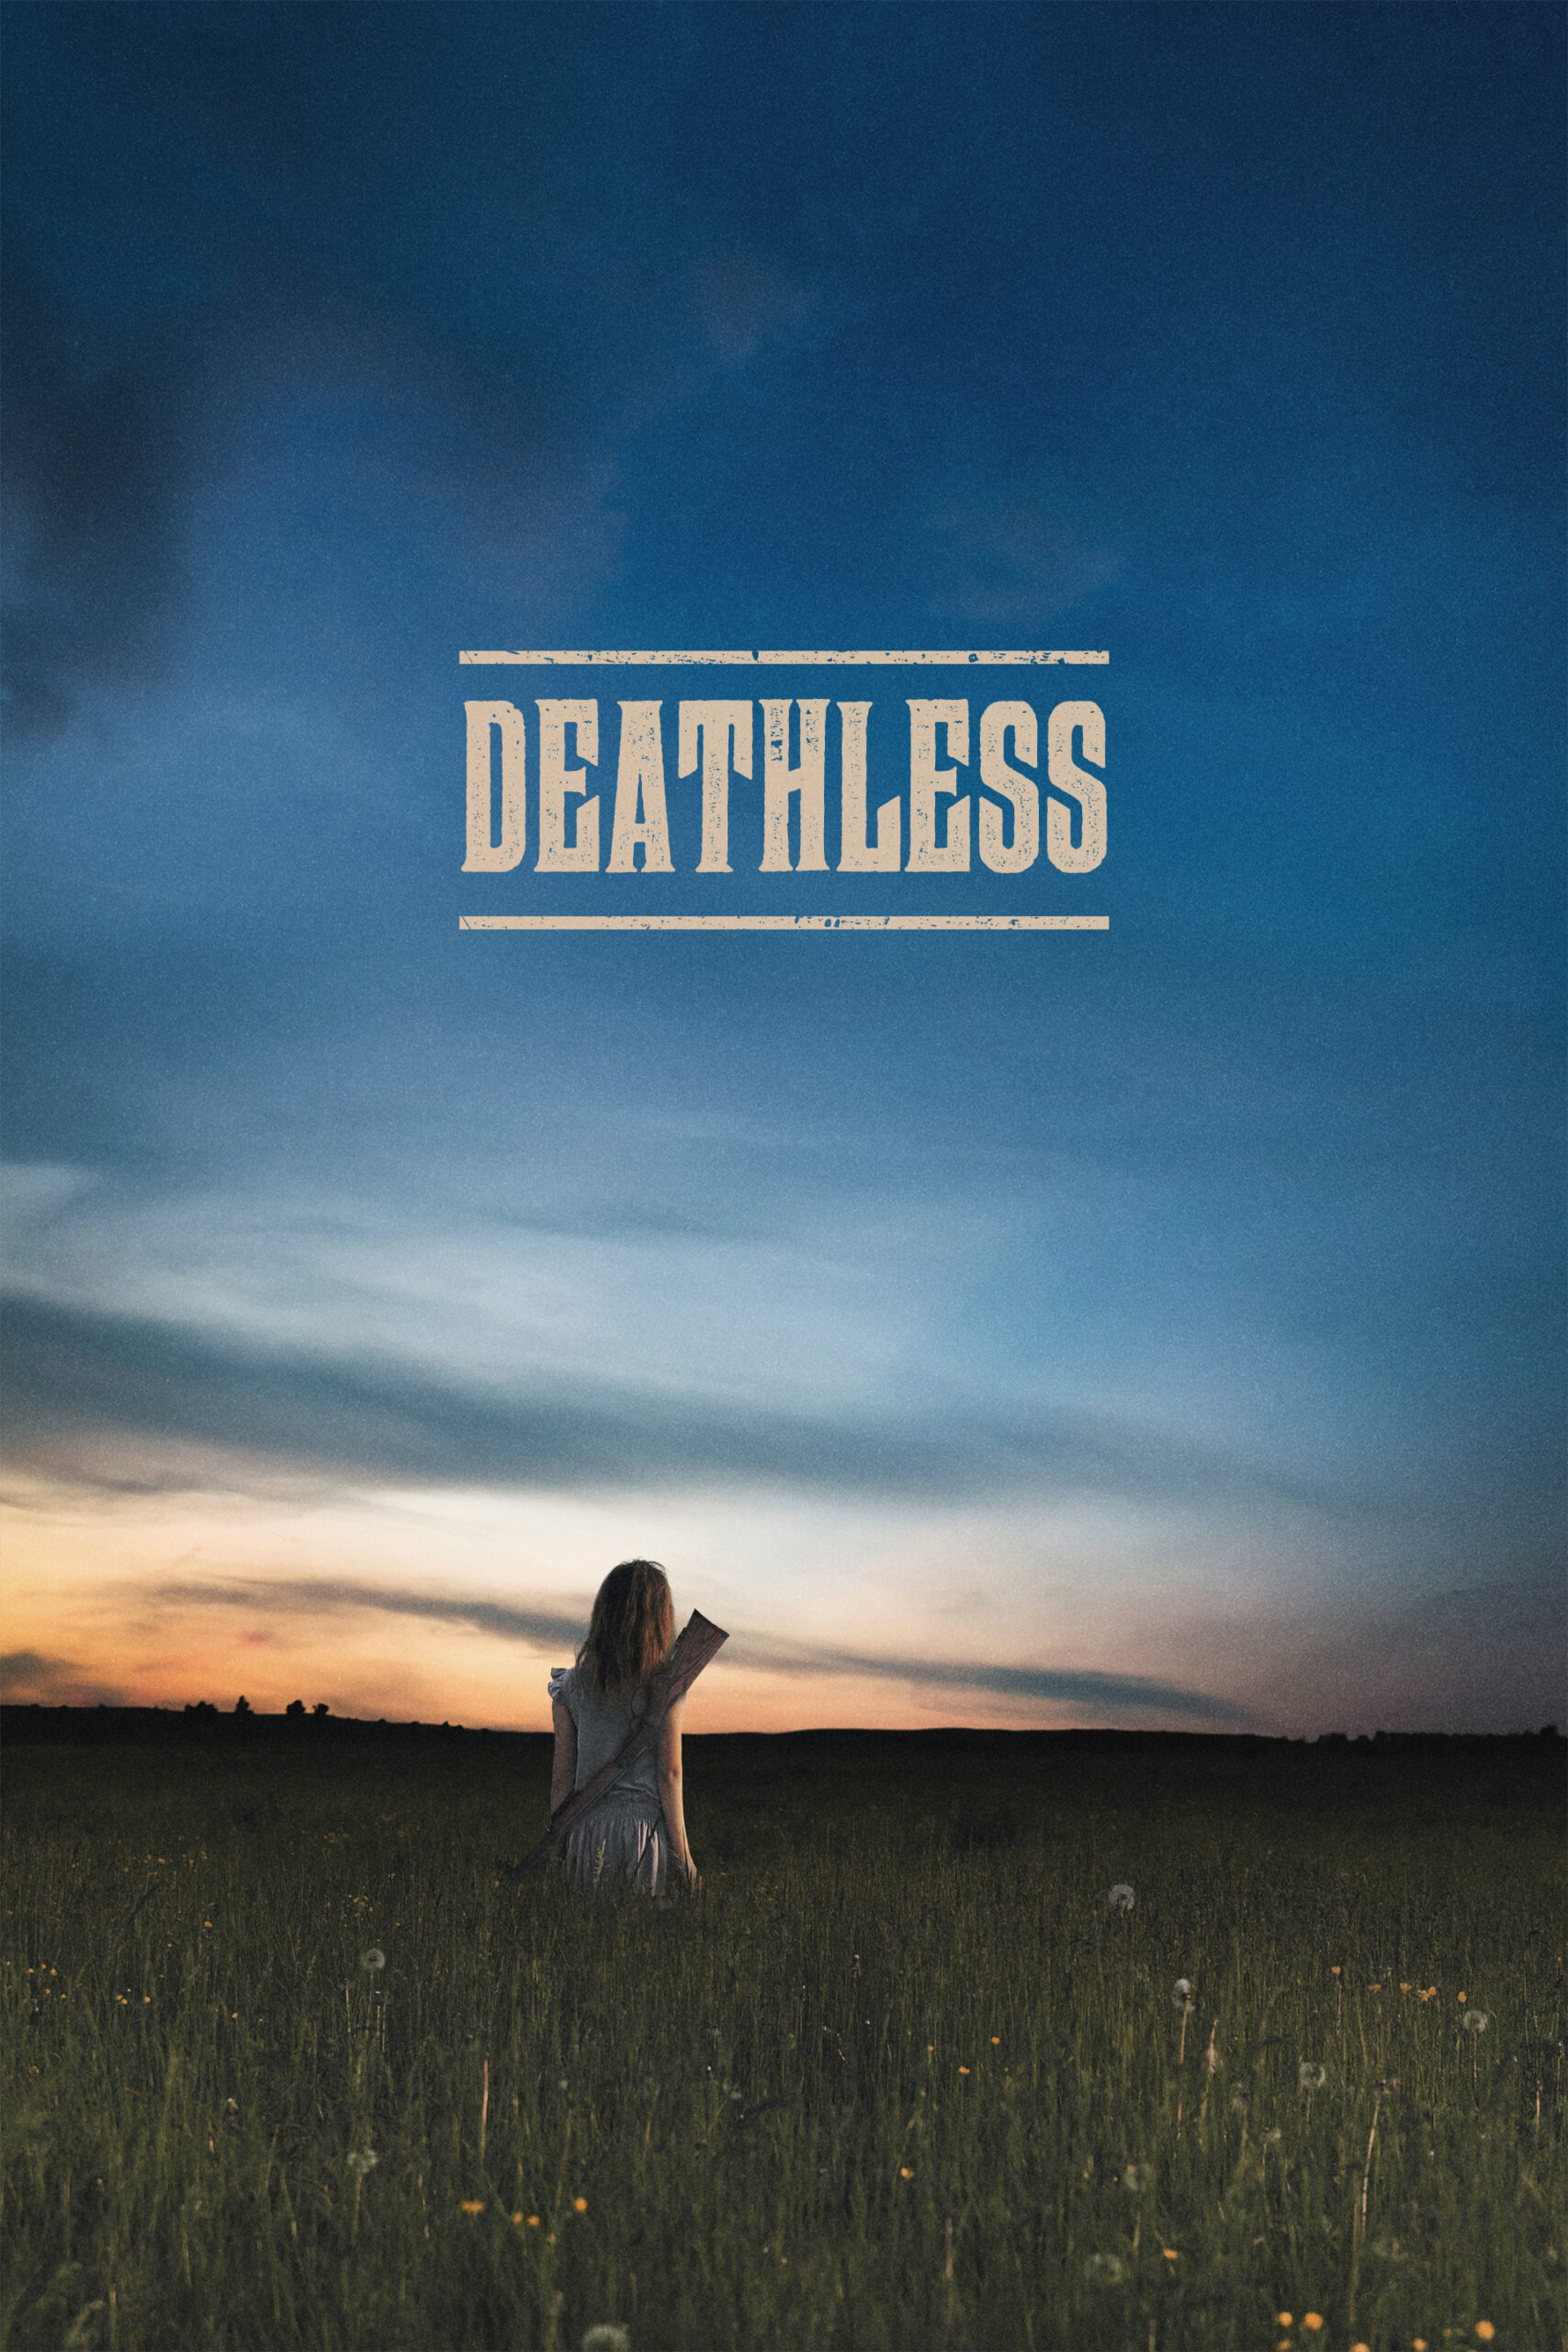 Jenna Kanell and Katie Carpenter Deathless Poster_indieactivity